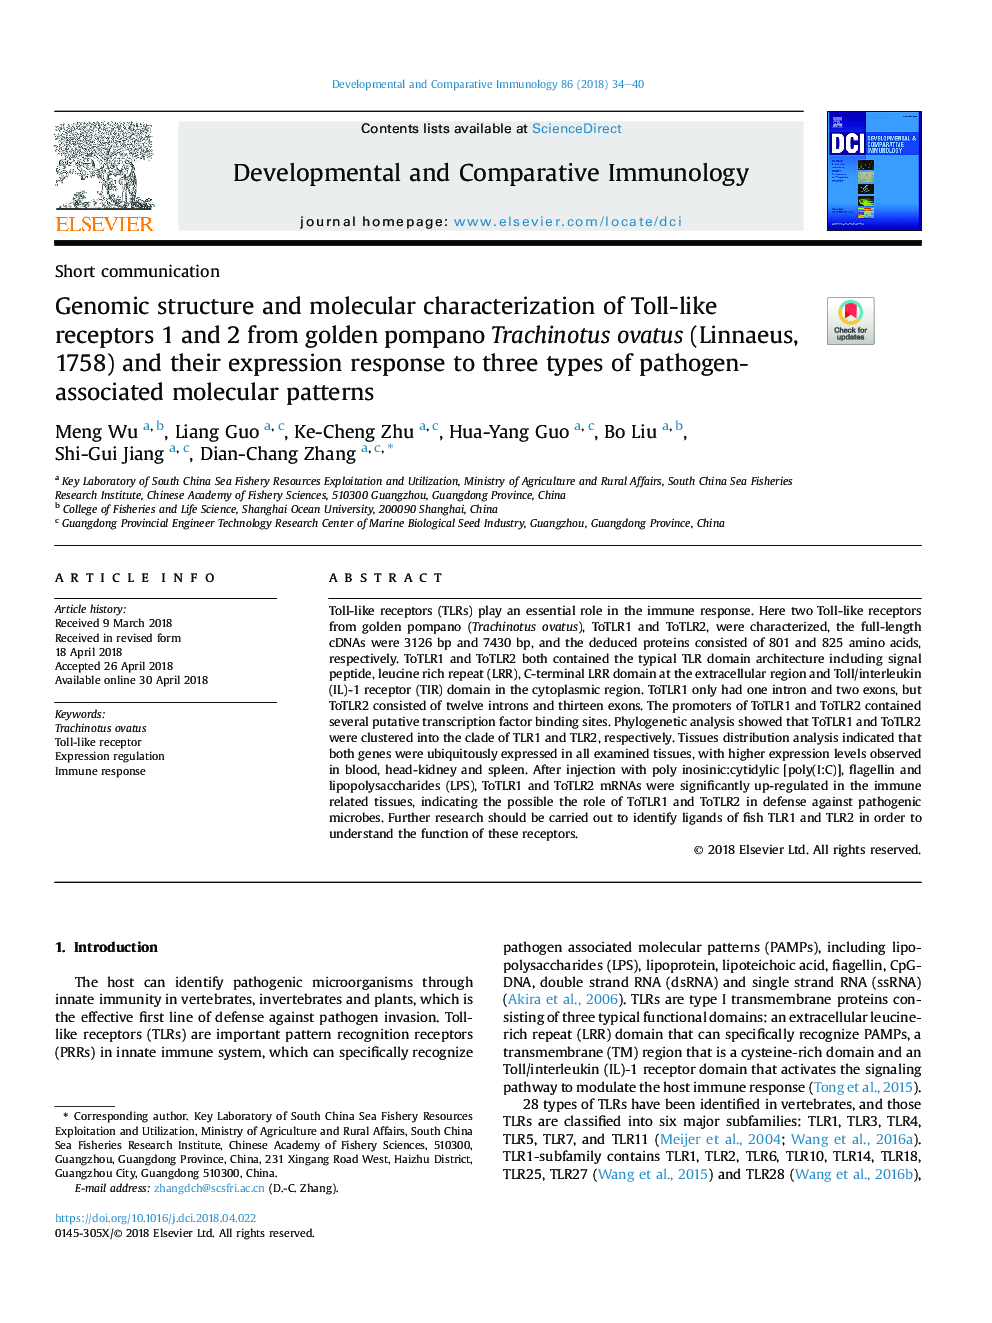 Genomic structure and molecular characterization of Toll-like receptors 1 and 2 from golden pompano Trachinotus ovatus (Linnaeus, 1758) and their expression response to three types of pathogen-associated molecular patterns